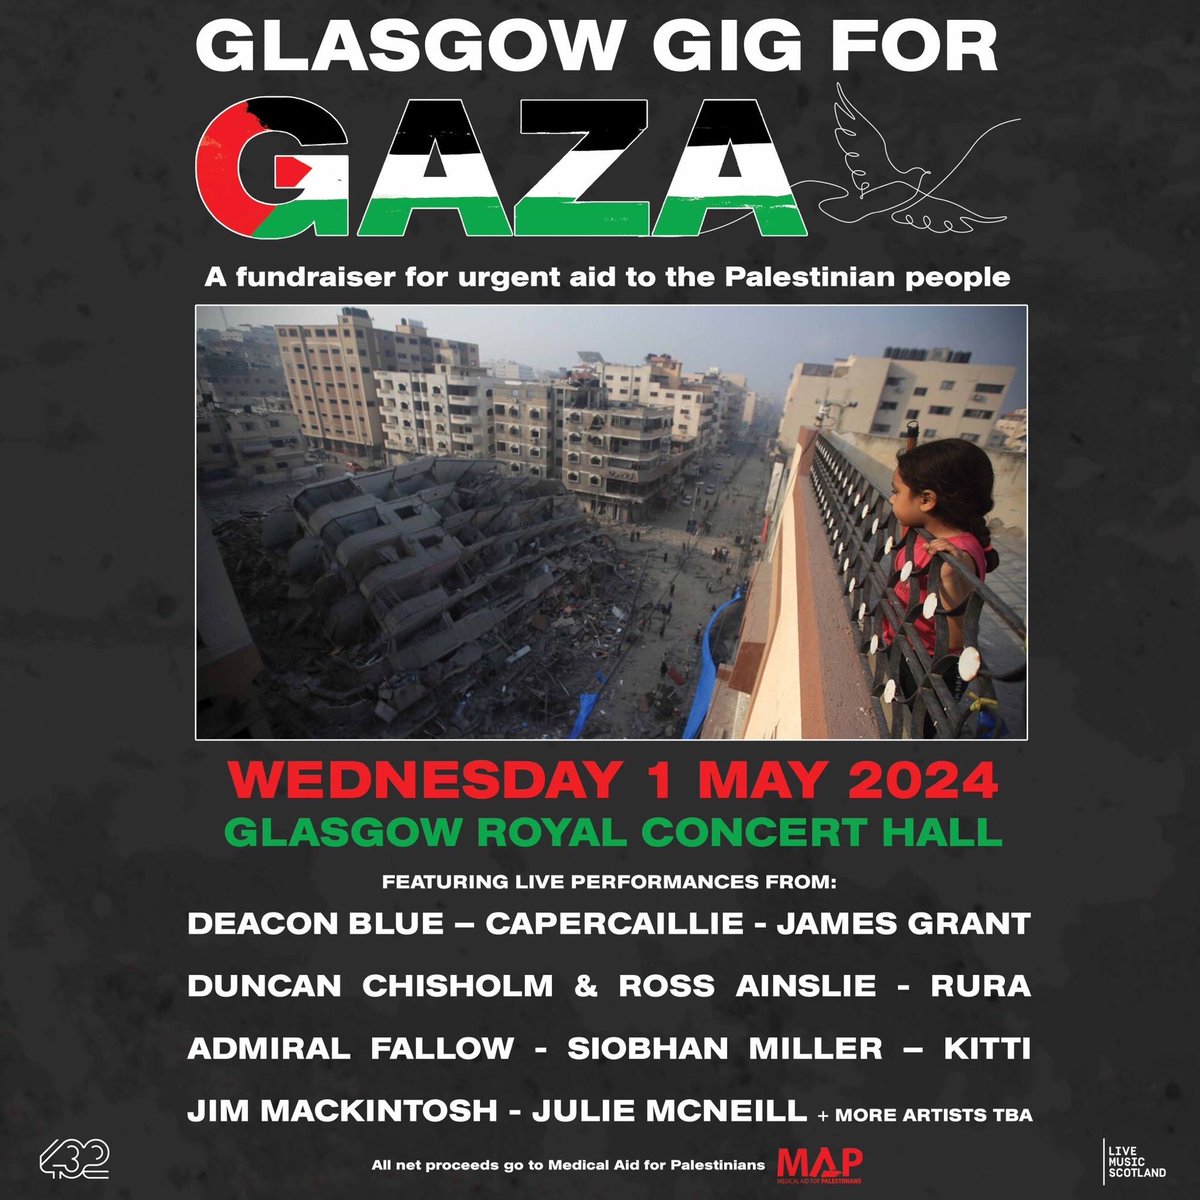 Star-studded night to raise money for Medical Aid for Palestinians. Feat Deacon Blue, Capercaillie, Rura and more. Glasgow Royal Concert Hall on Wednesday 1st May 2024. projects.handsupfortrad.scot/handsupfortrad…